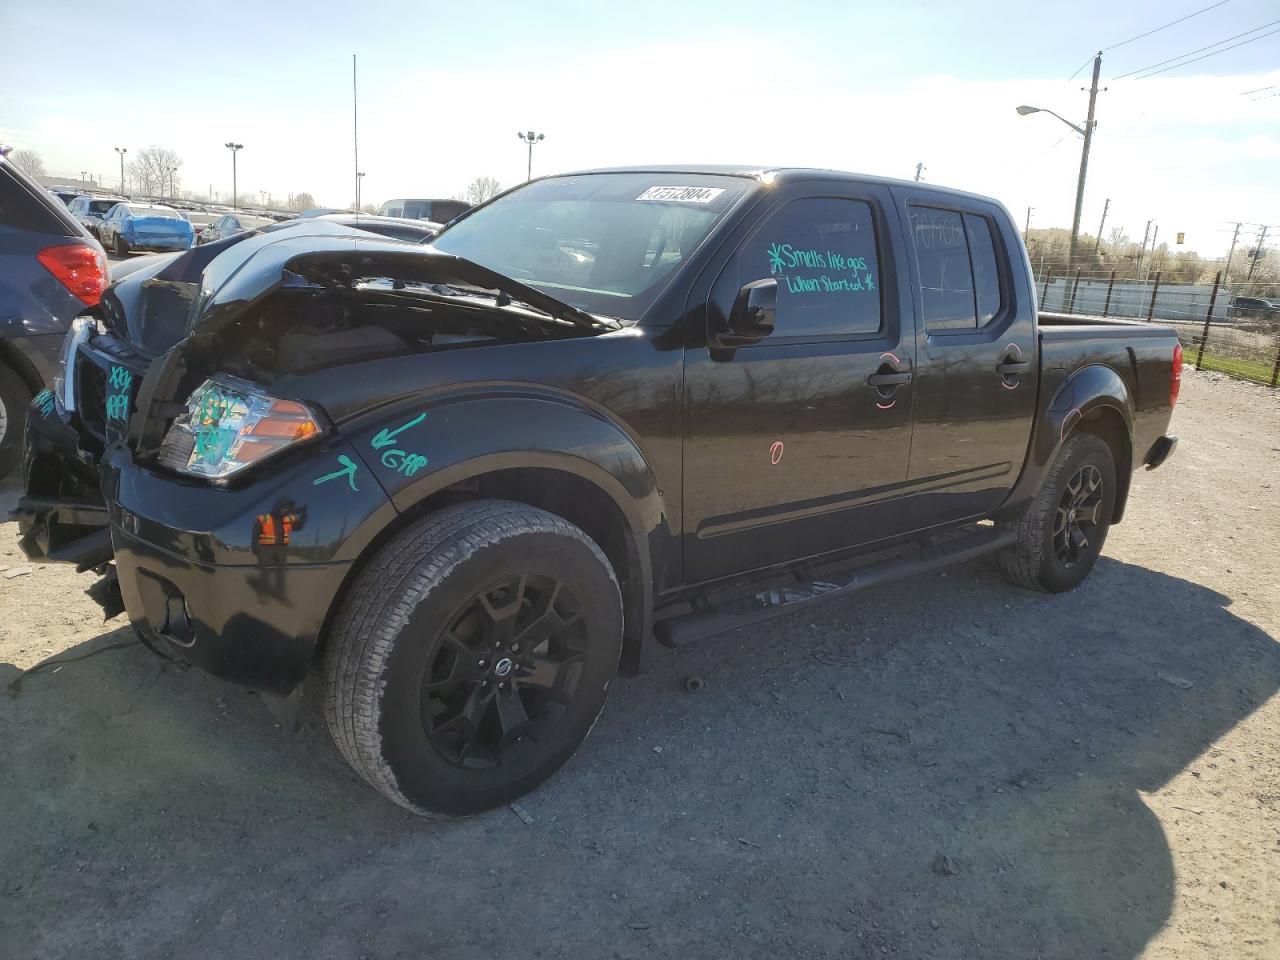 vin: 1N6ED0EB0LN701906 1N6ED0EB0LN701906 2020 nissan navara (frontier) 3800 for Sale in 46254 2452, In - Indianapolis, Indianapolis, USA